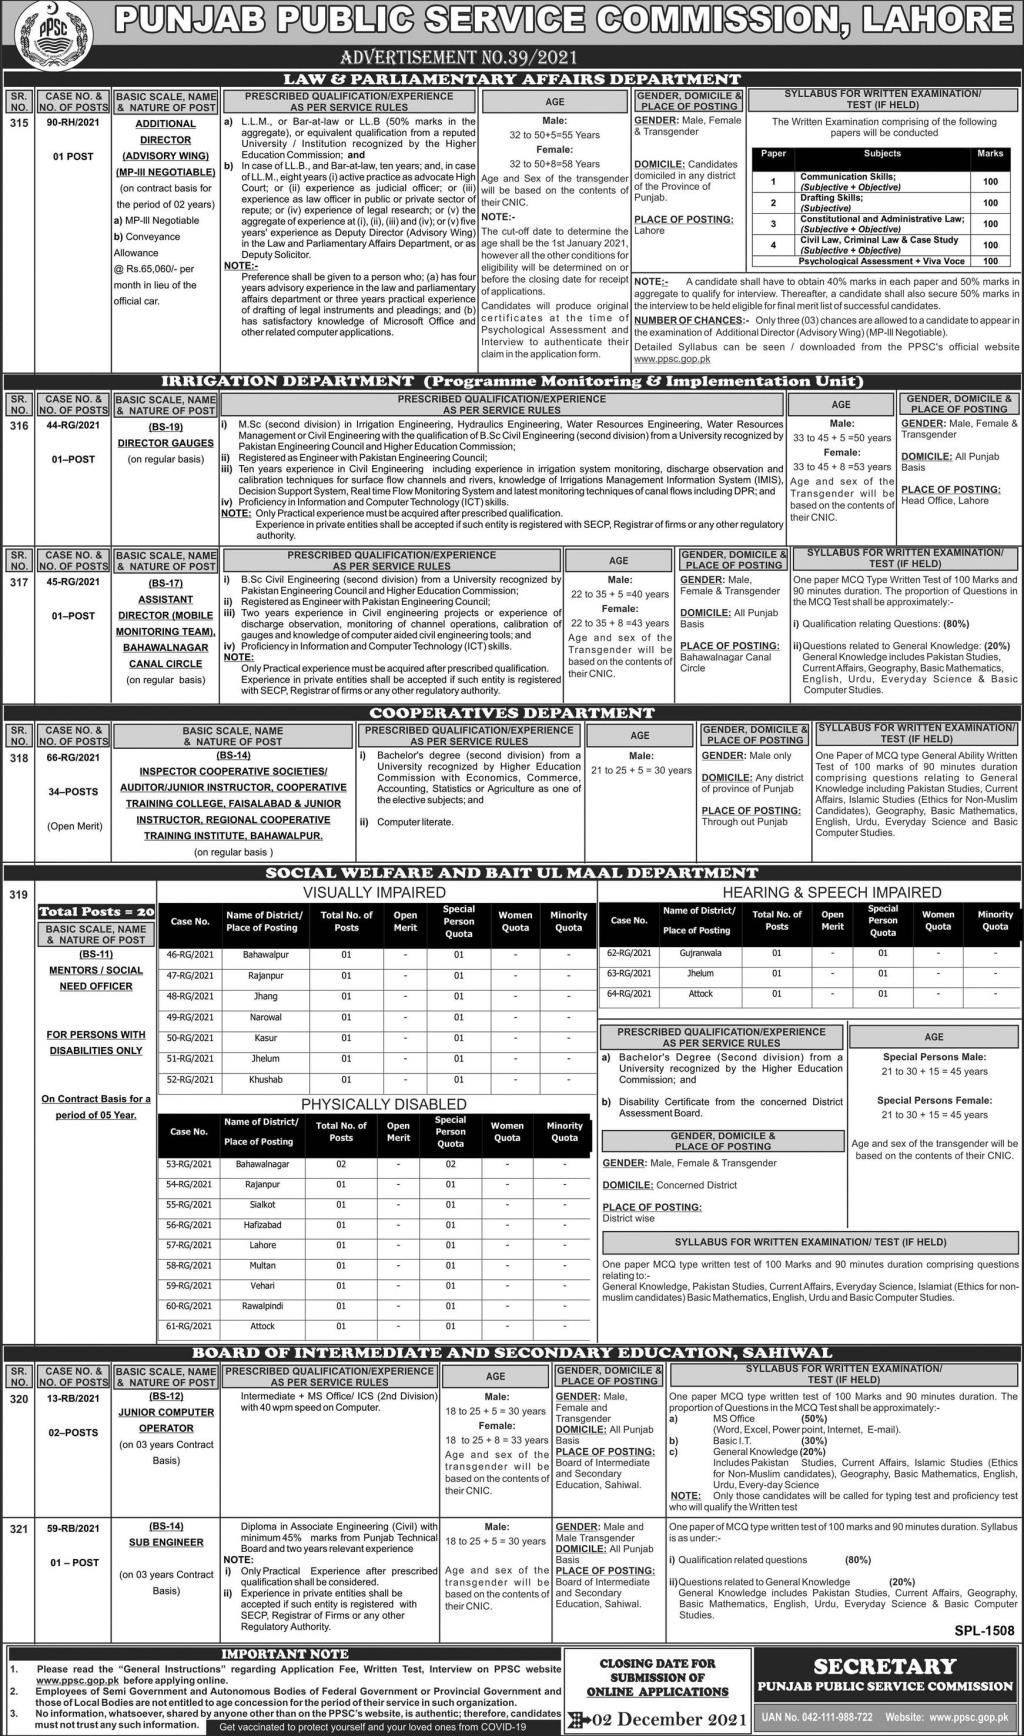 Management jobs in PPSC